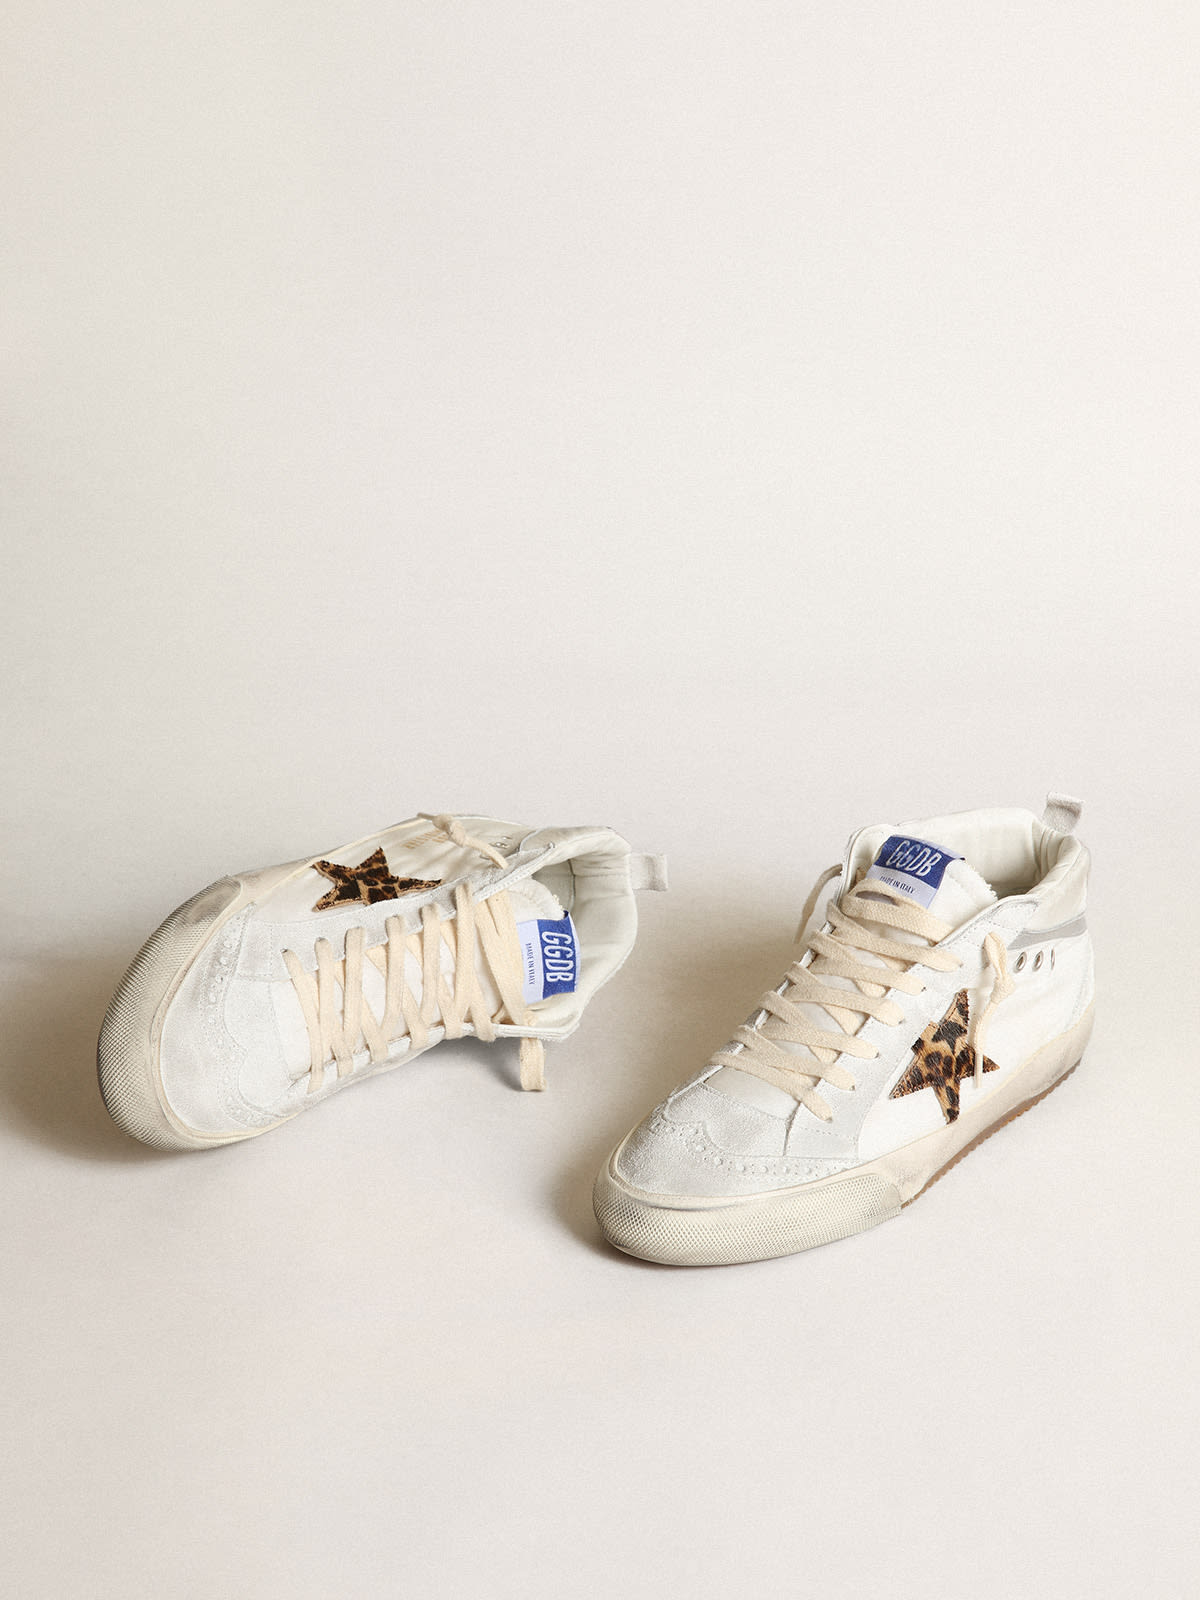 Golden Goose - Mid Star LTD sneakers in white nylon with leopard-print pony skin star and pink metallic leather heel tab in 